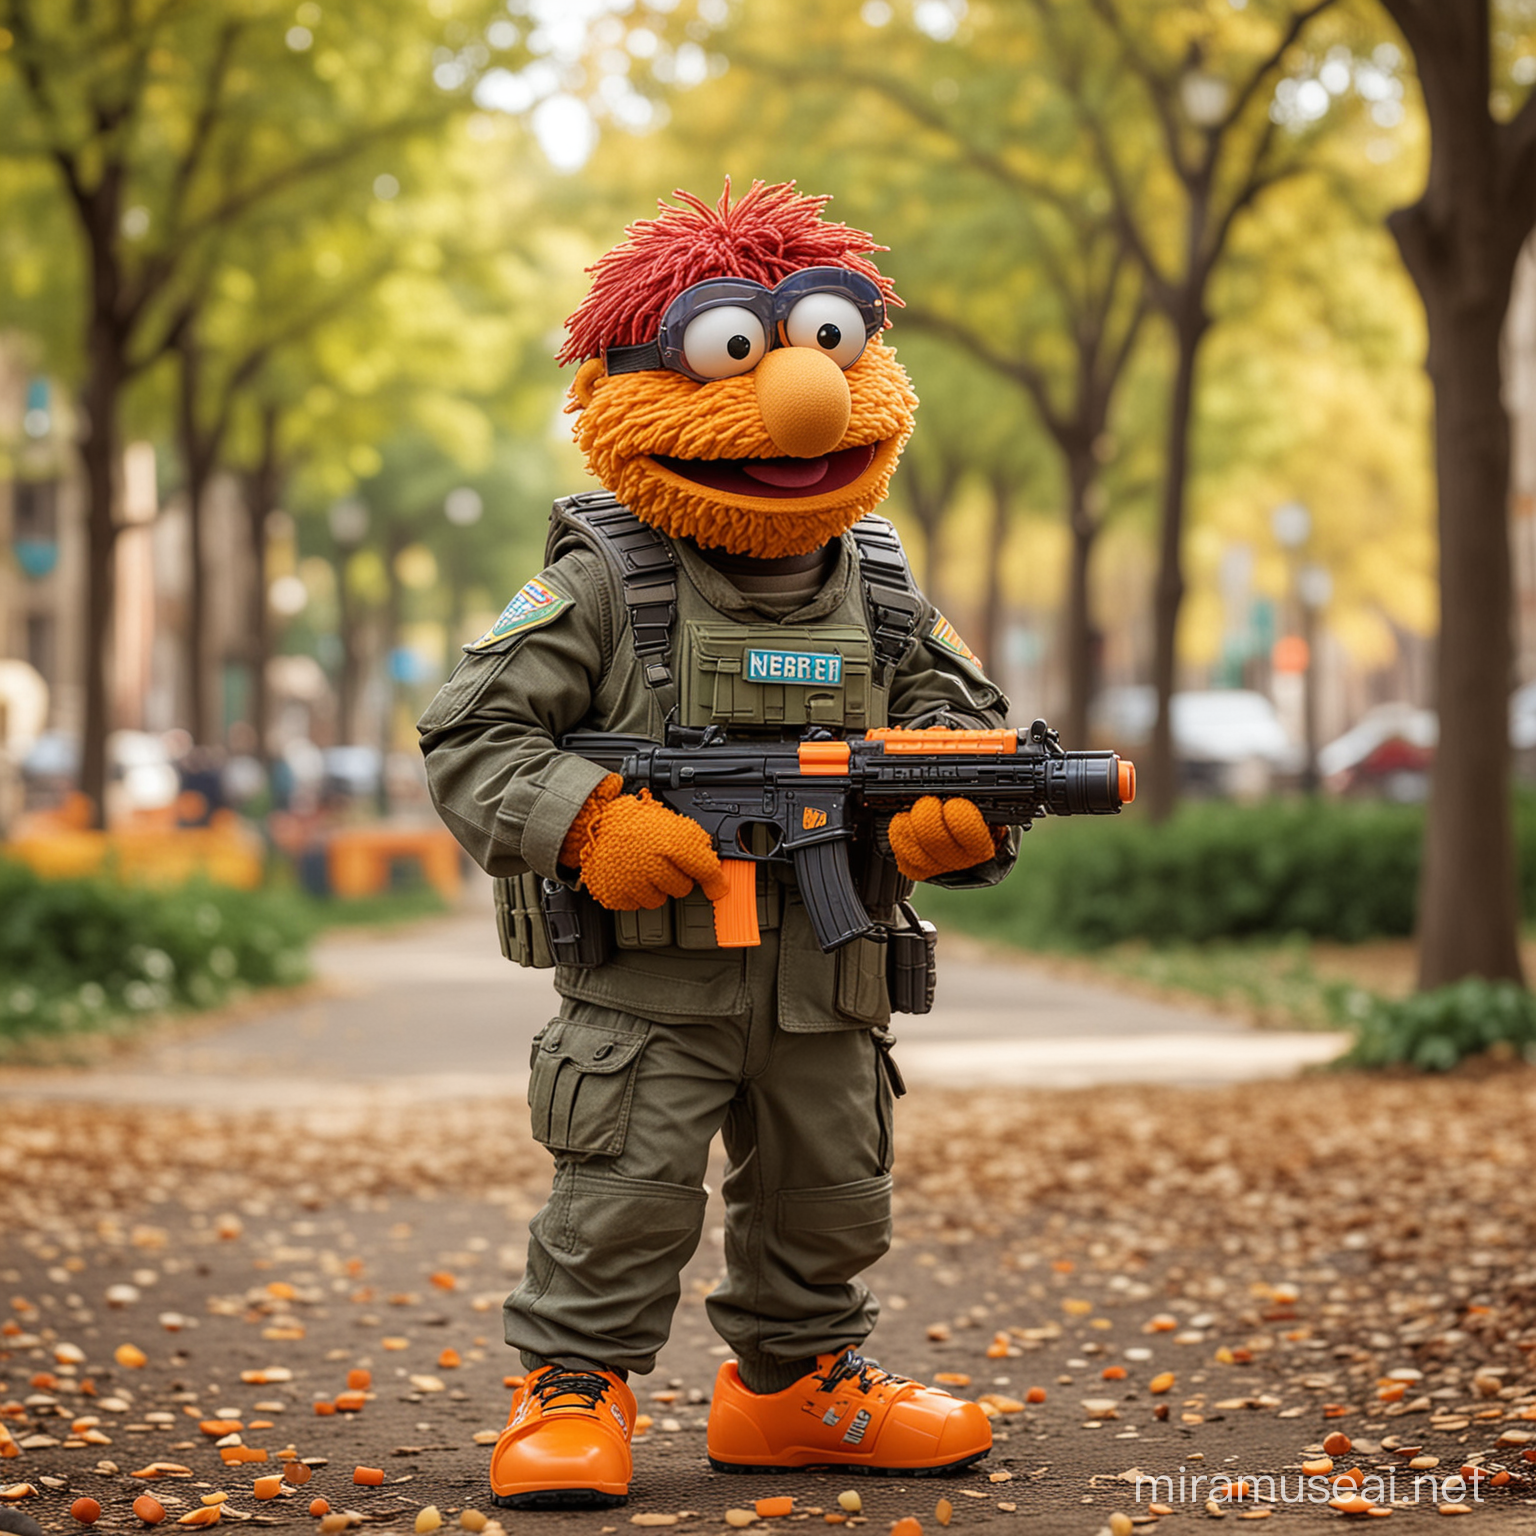 Ernie from Sesame Street Playing with Nerf Gun in Urban Park